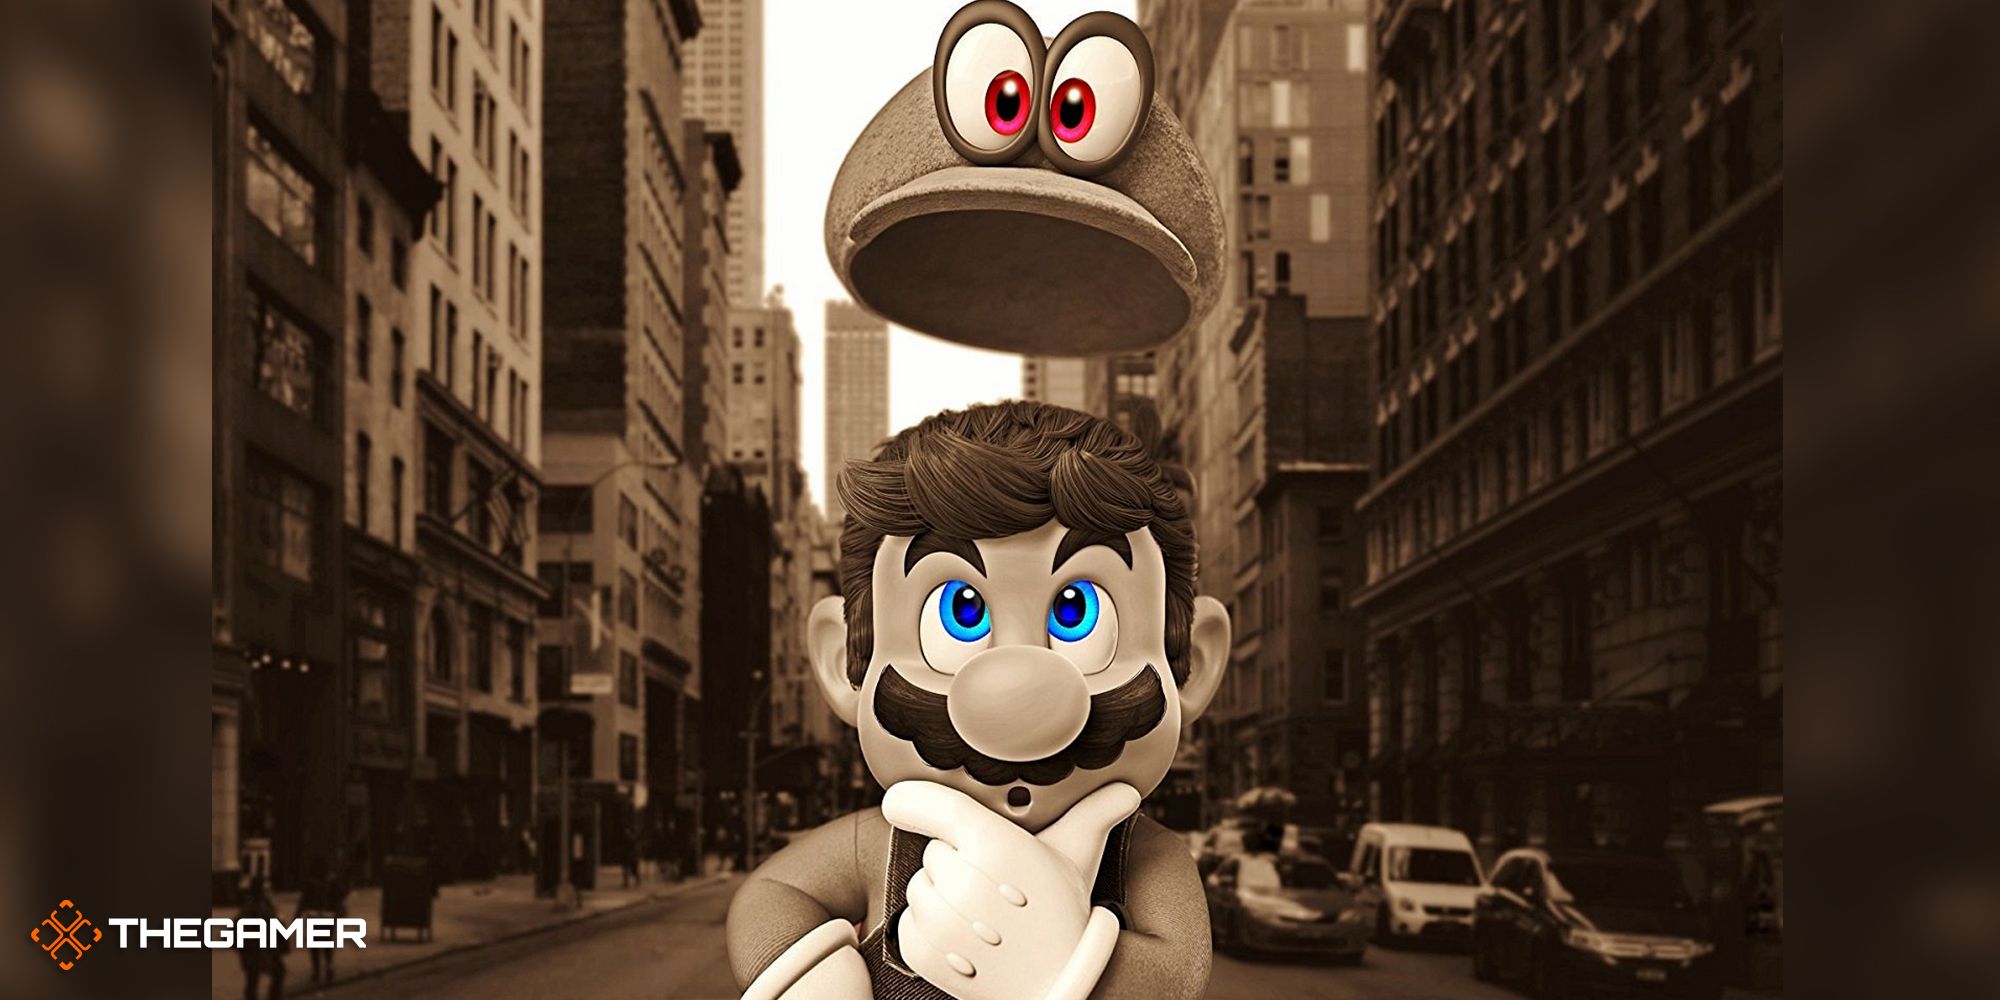 Where Is The Follow-Up To Super Mario Odyssey?